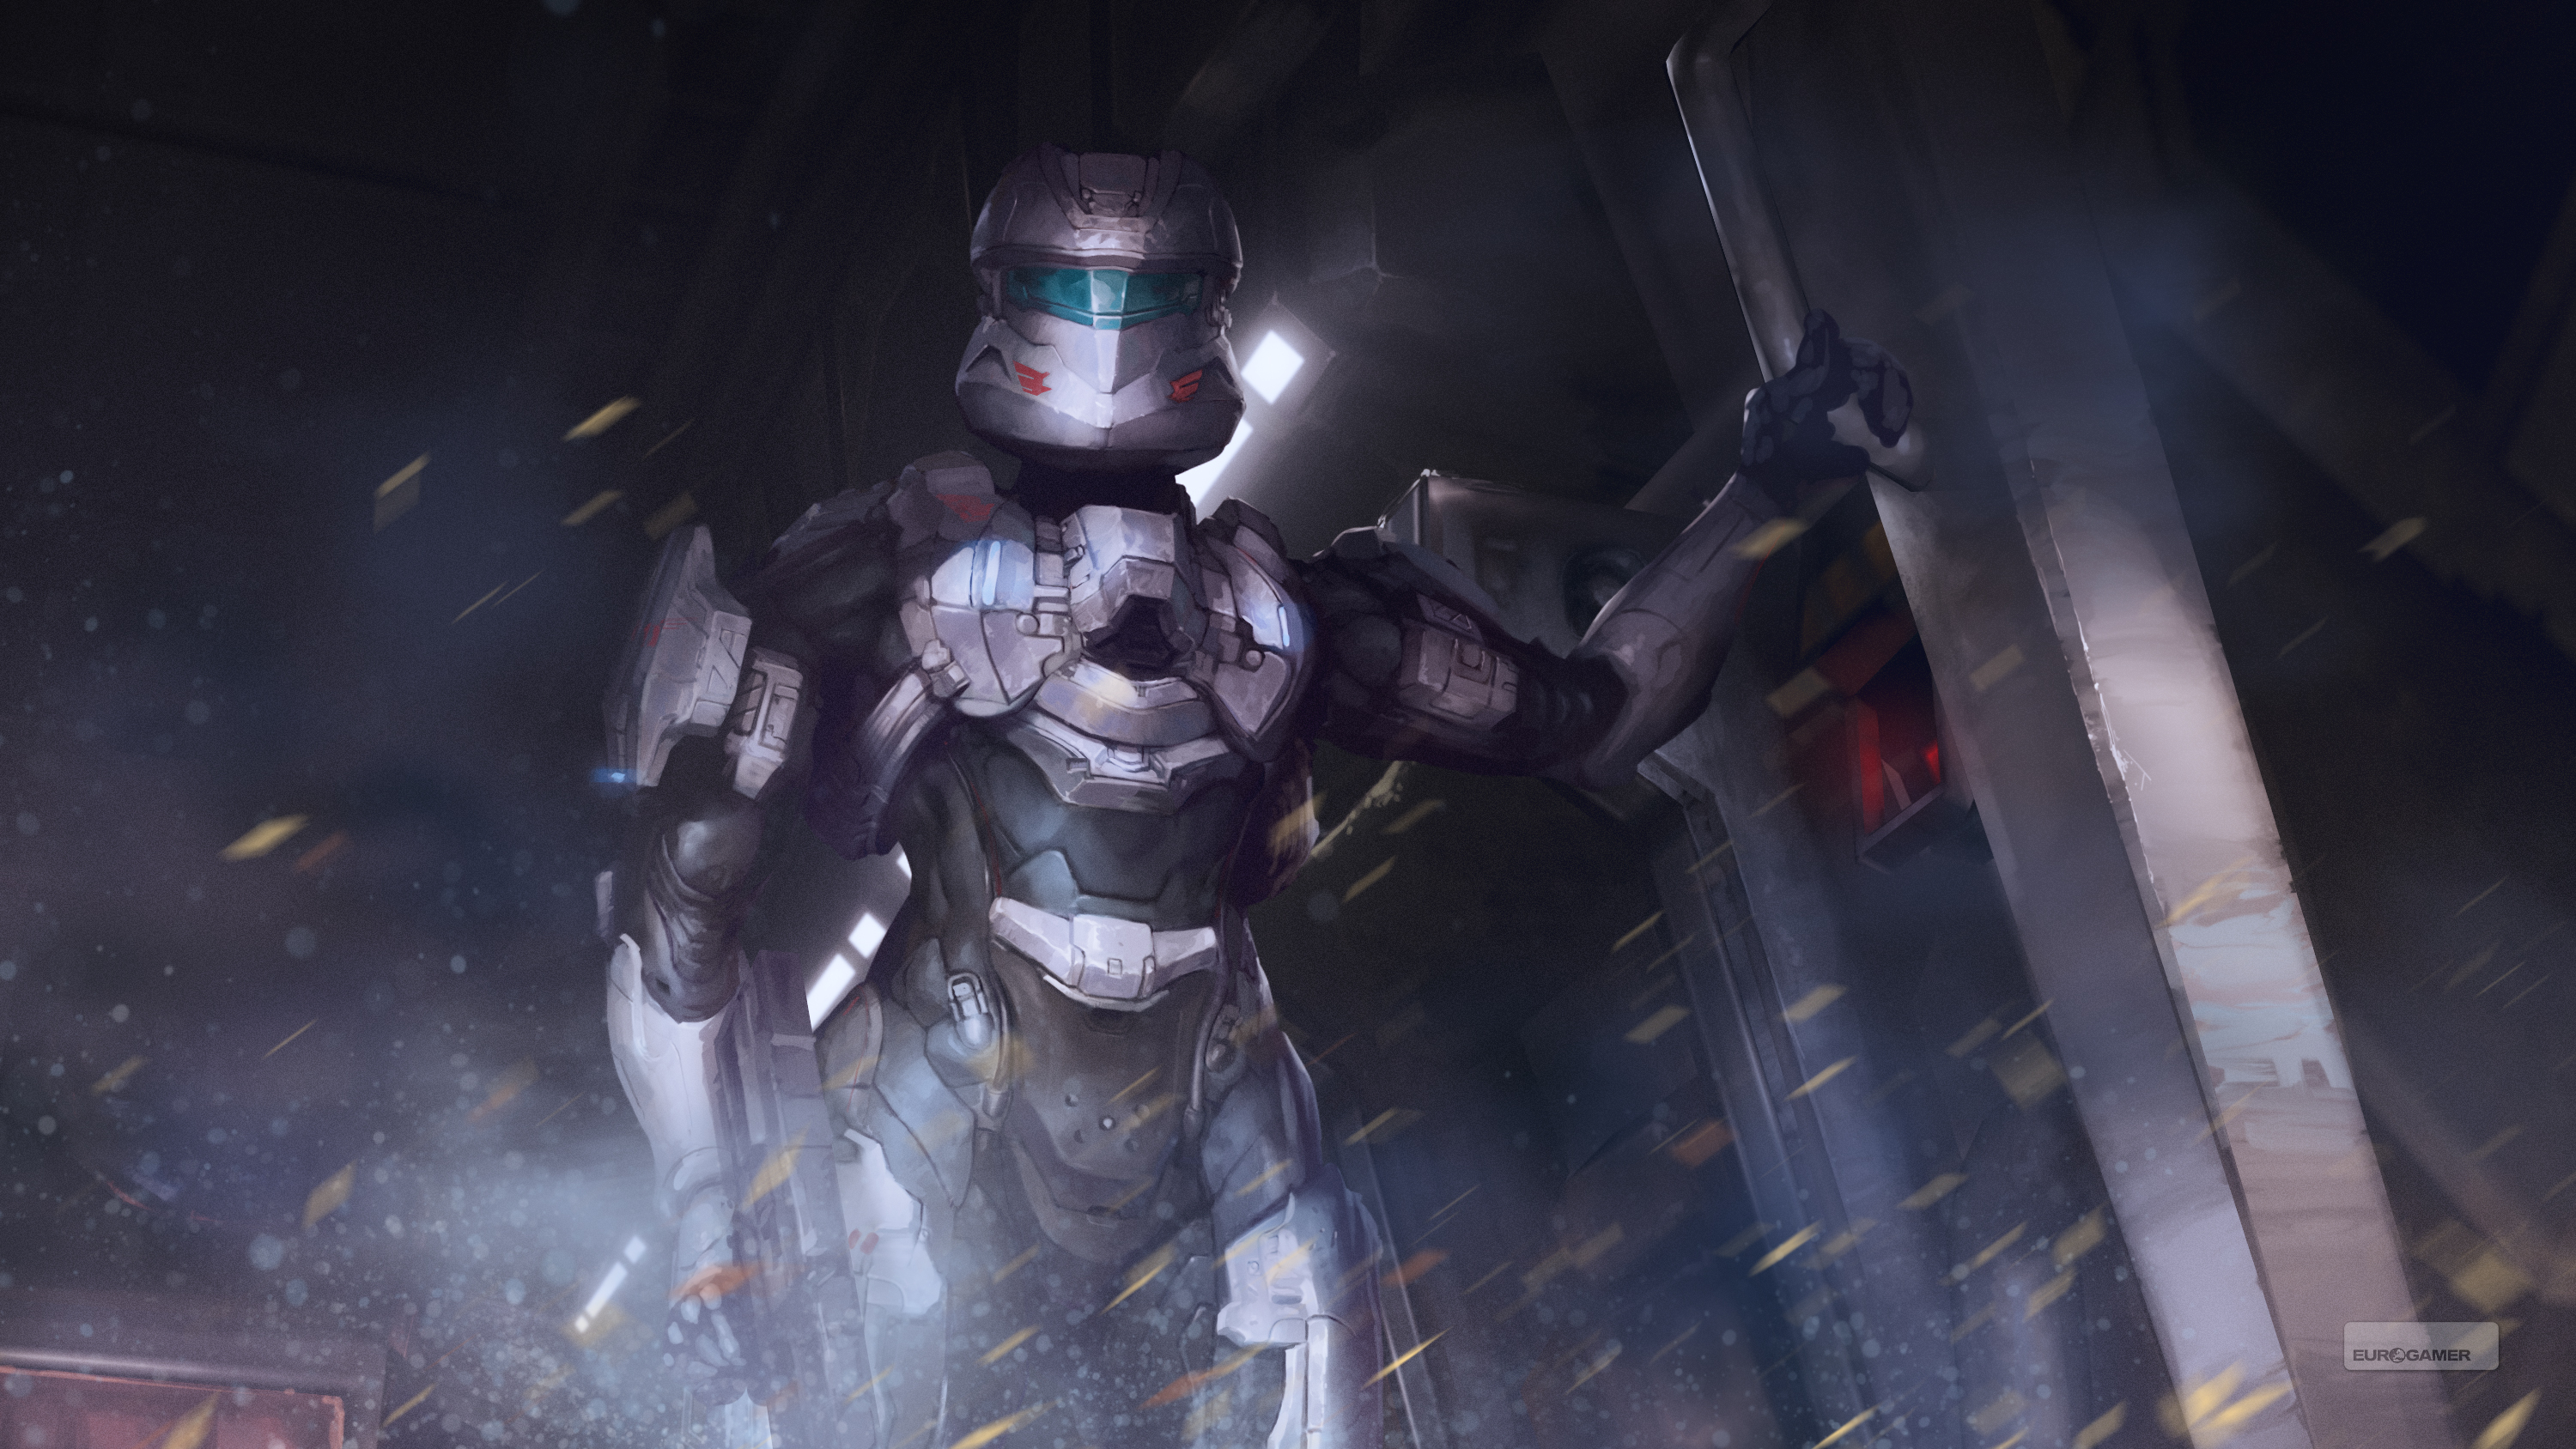 This Halo Spartan Assault Wallpaper Is Available In Sizes